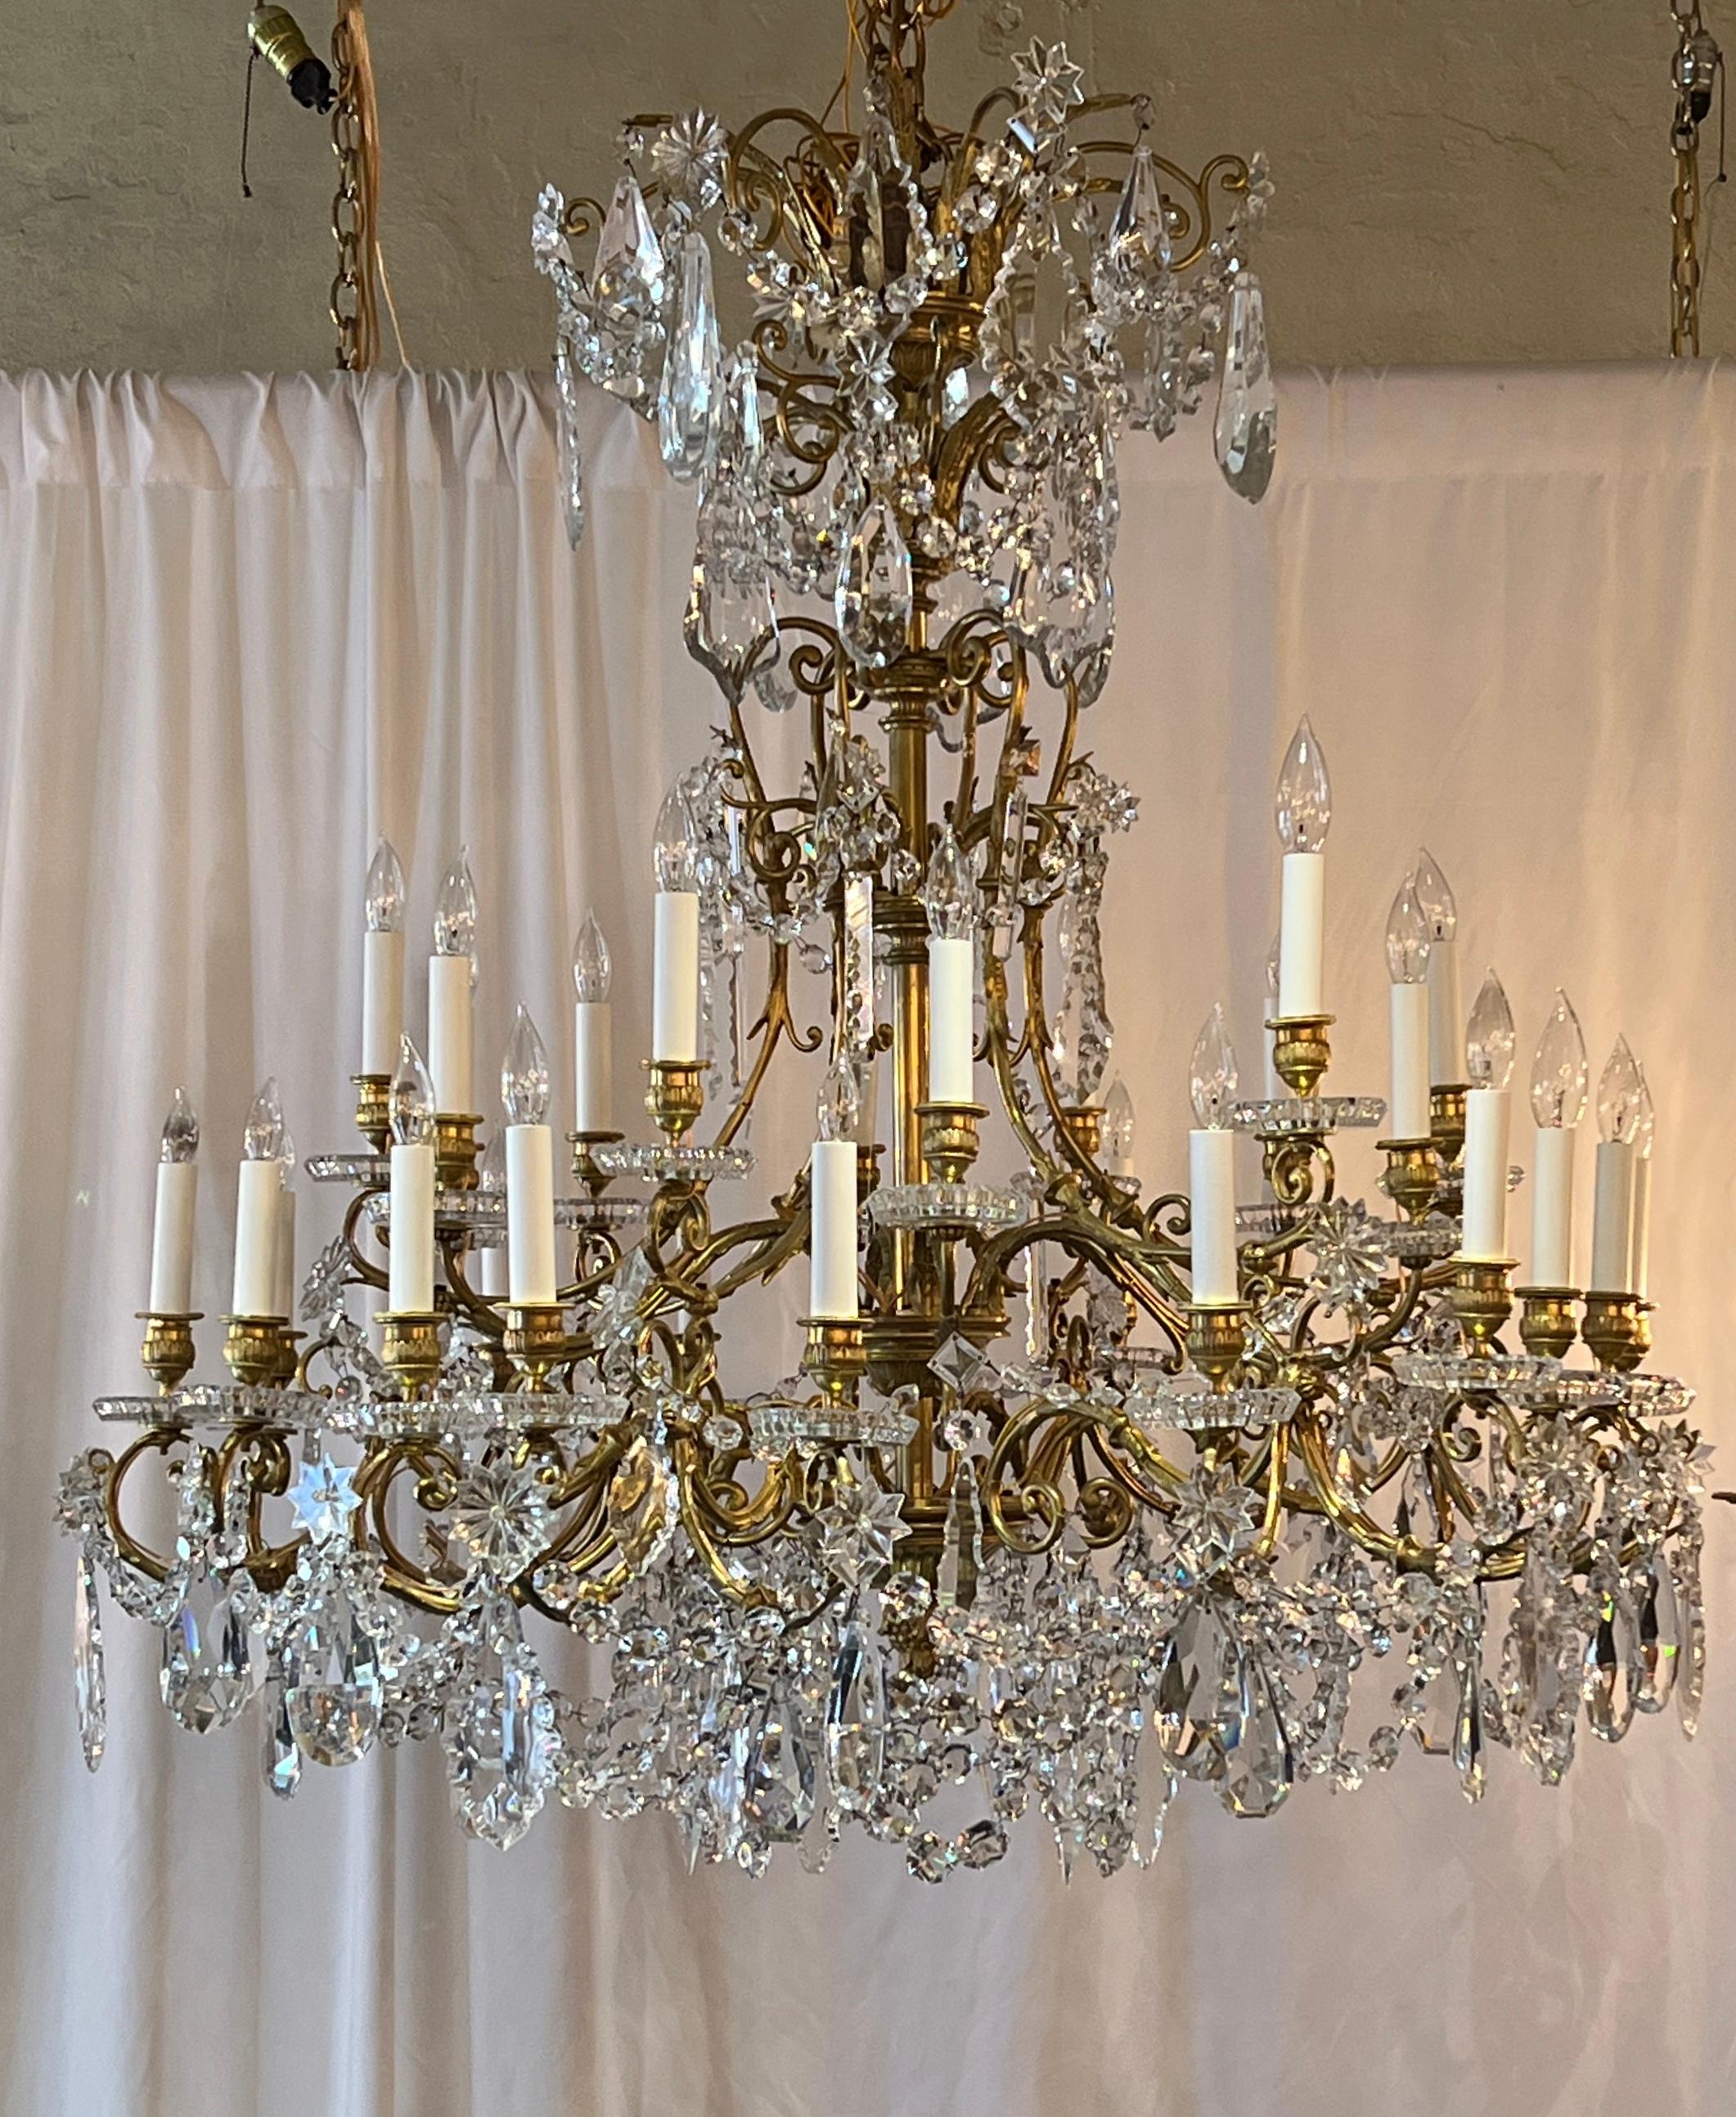 Magnificent Antique French Gold Bronze and Baccarat Cut Crystal 30 Light Chandelier, Circa 1900-1920.
Substantial draping of baccarat prisms and beads.